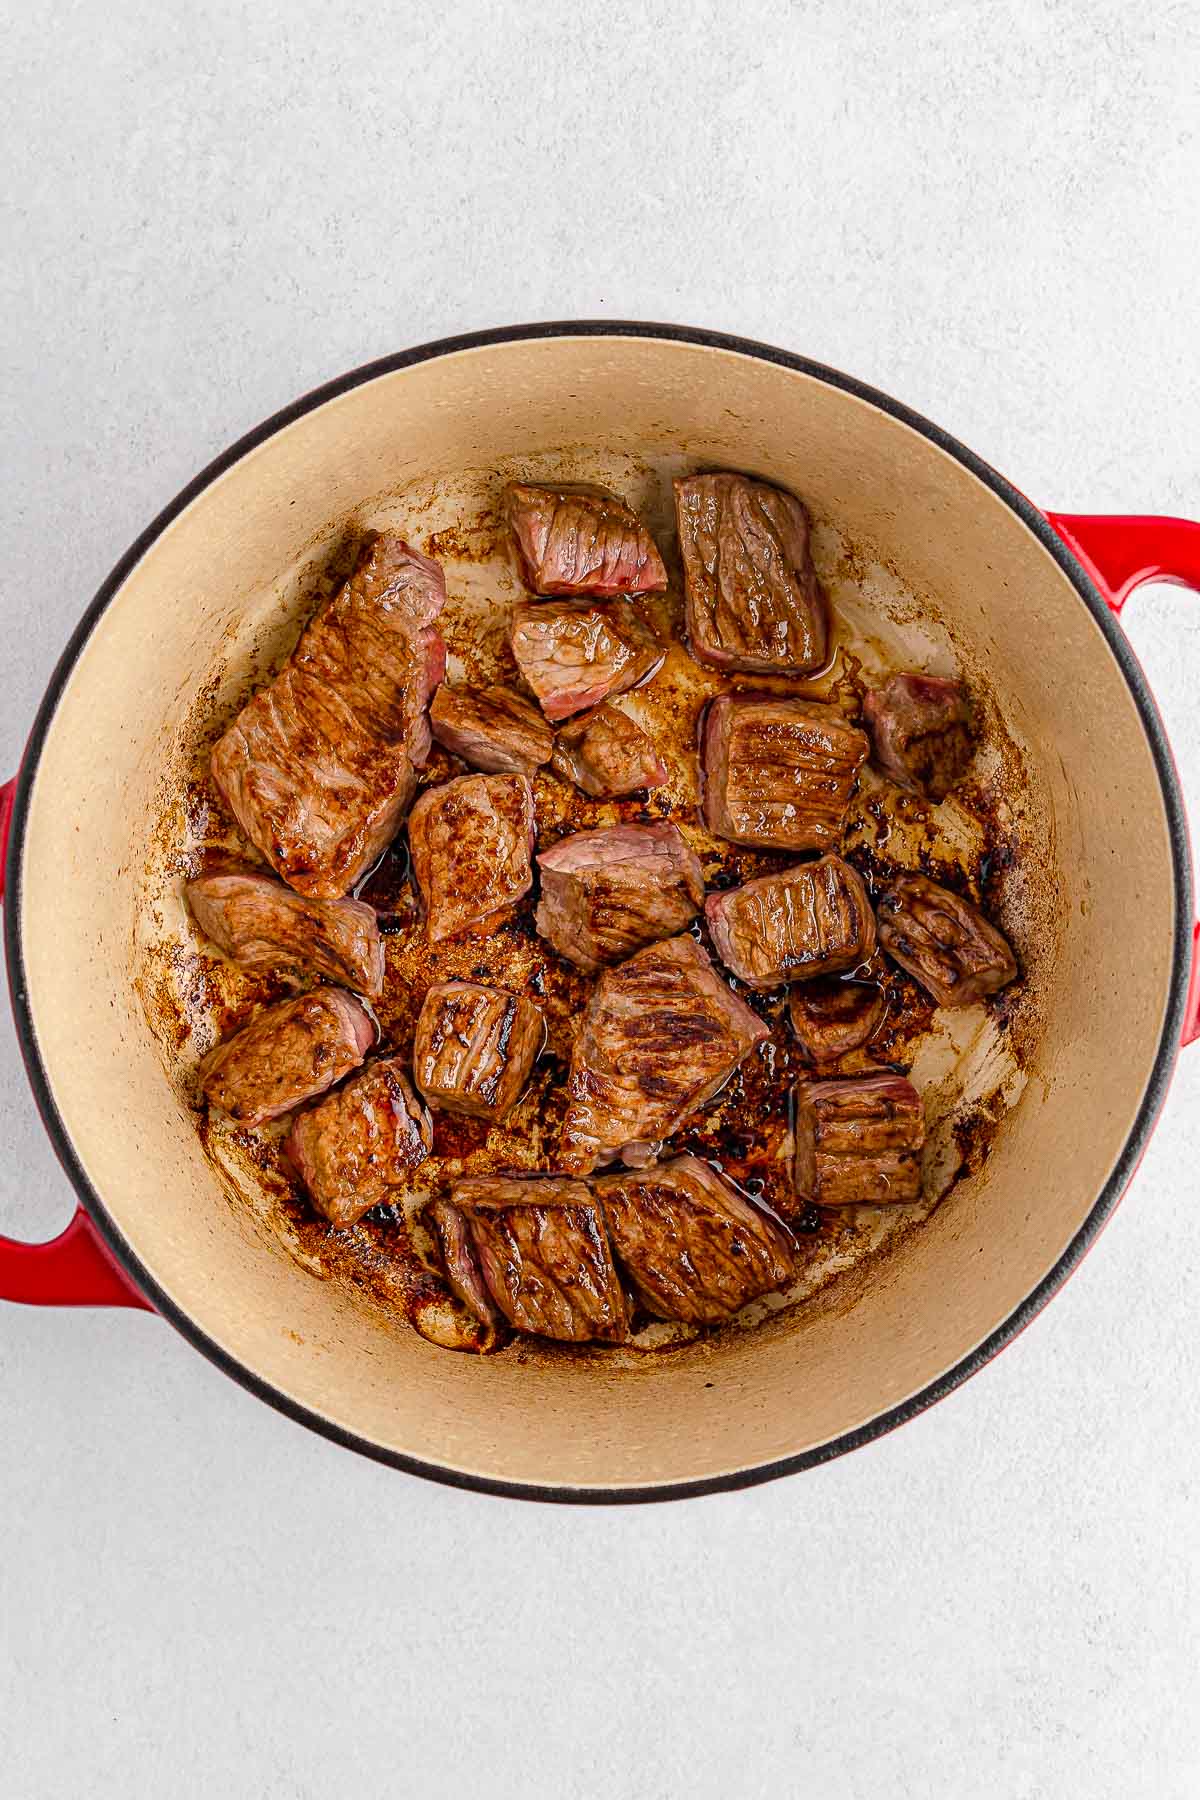 A pot with meat in it on a white background.